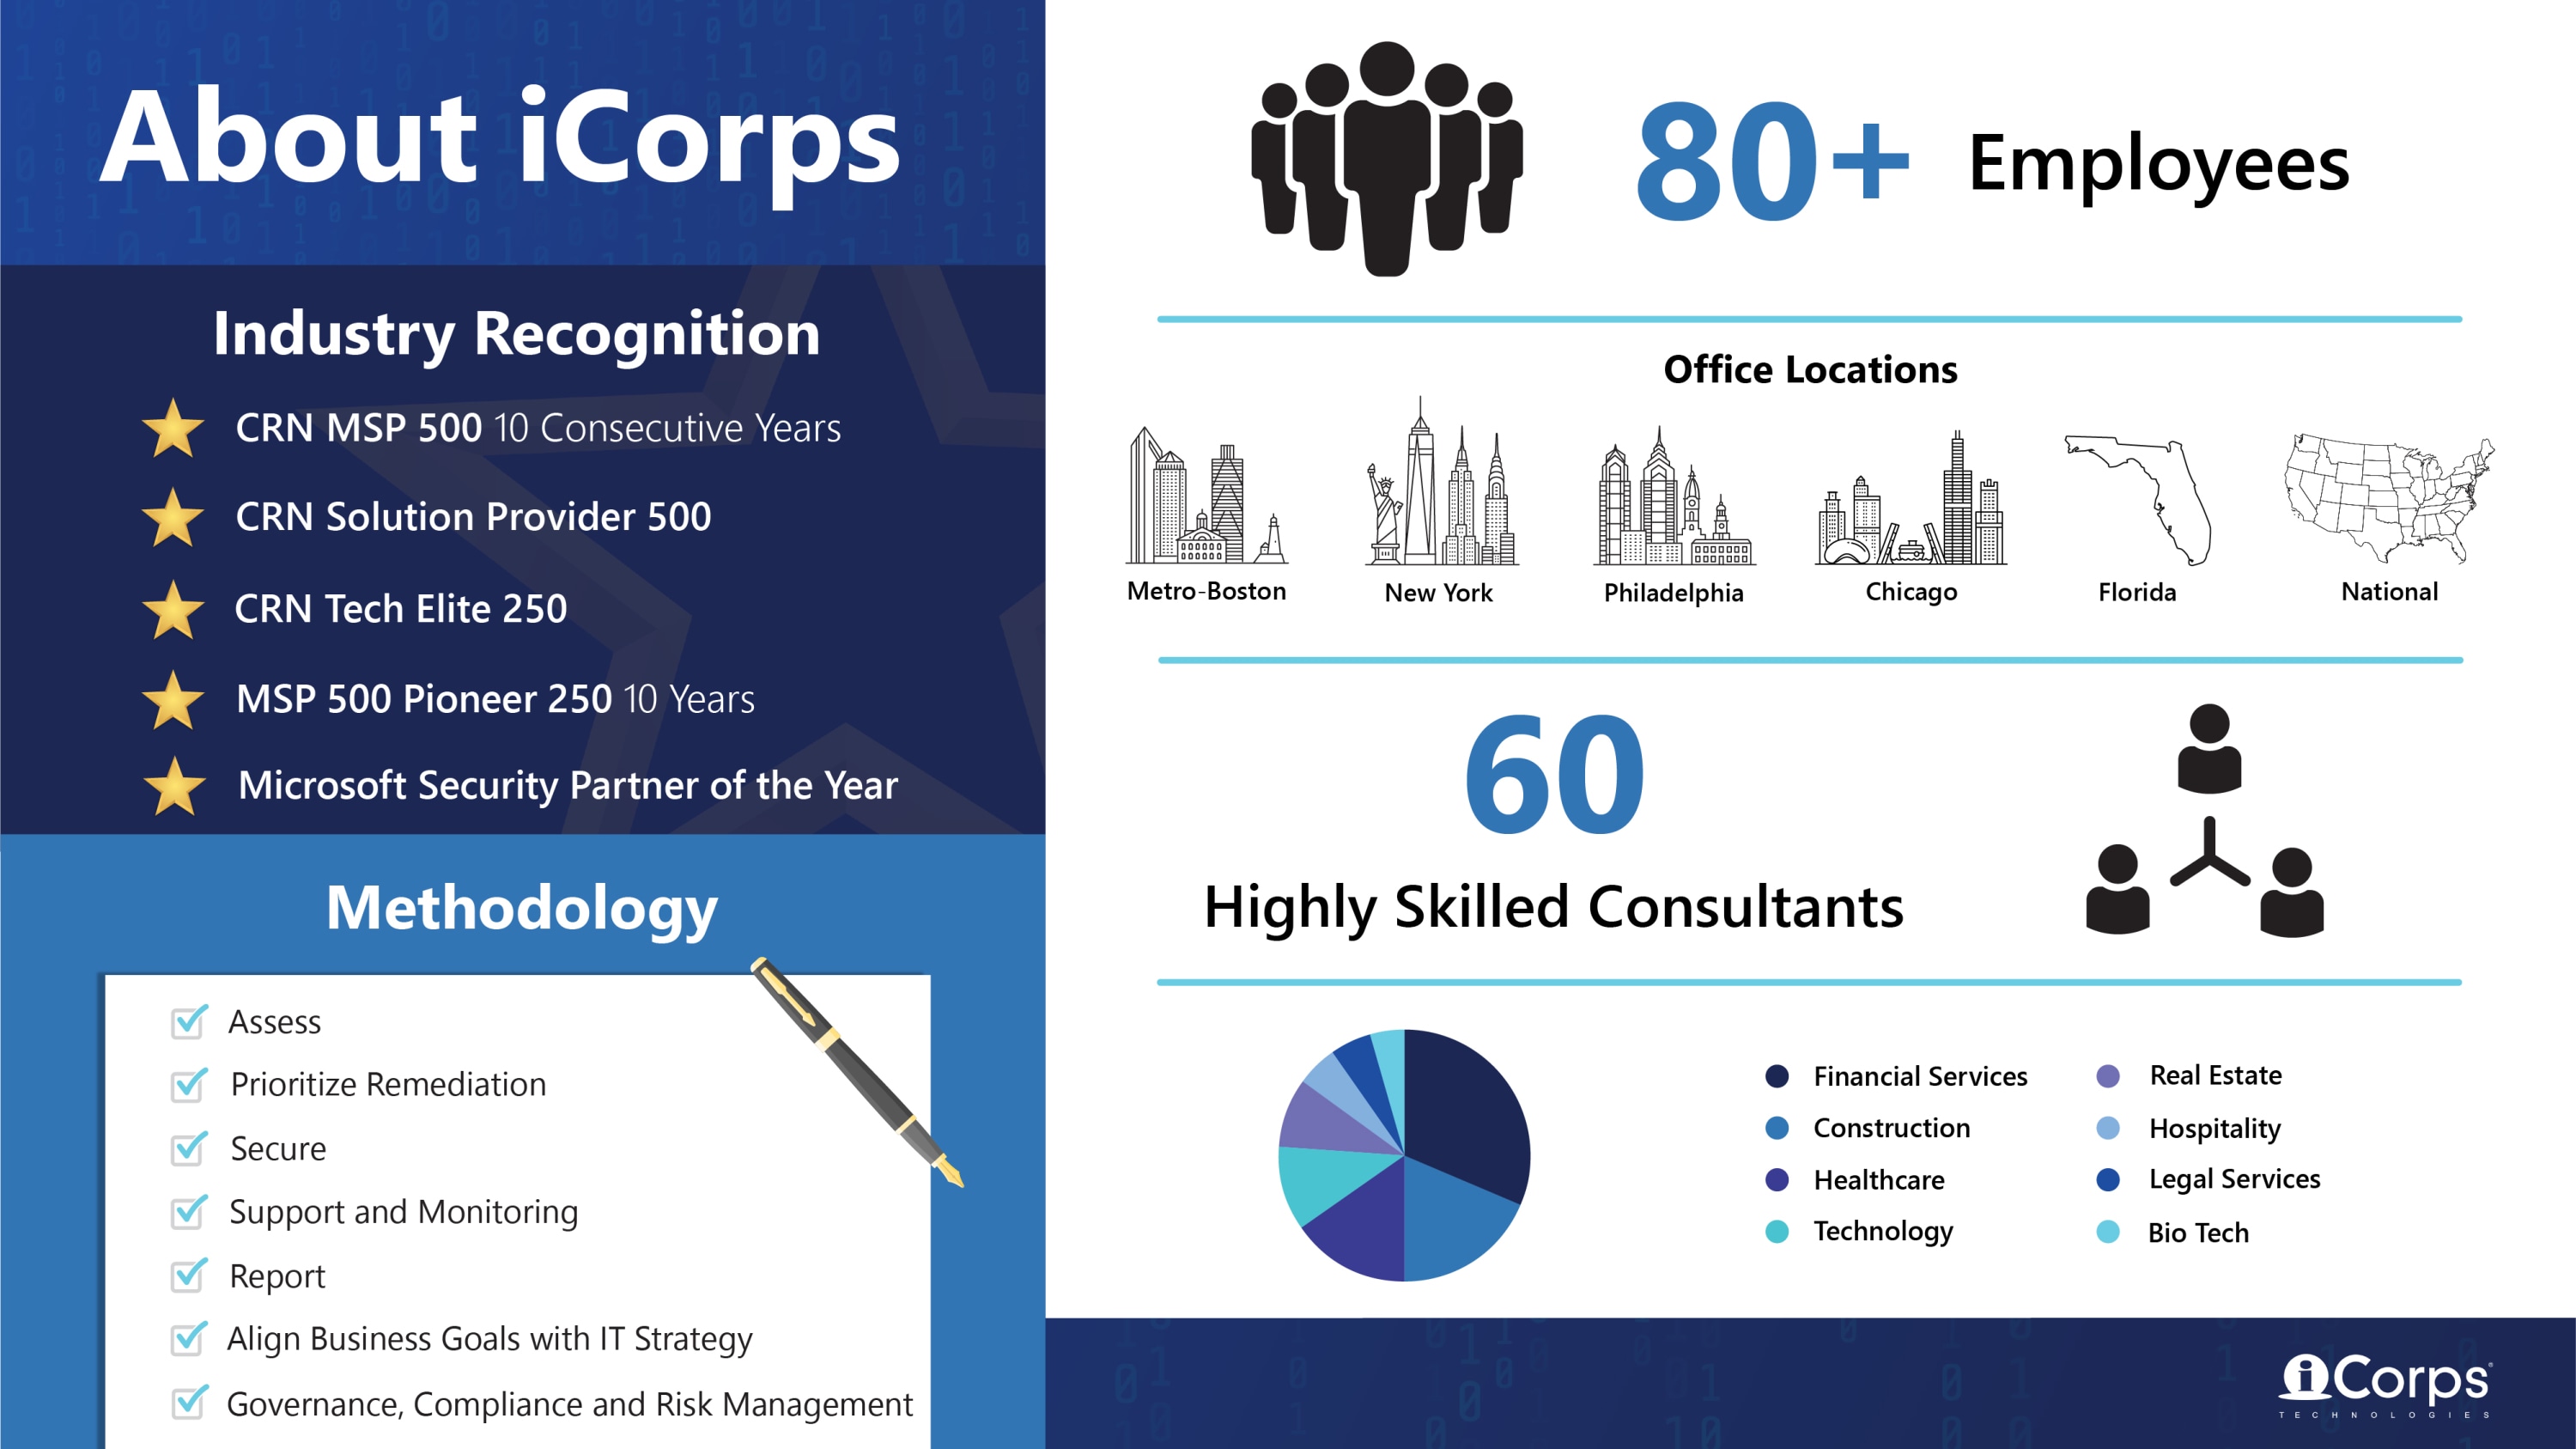 Learn more about iCorps Technologies